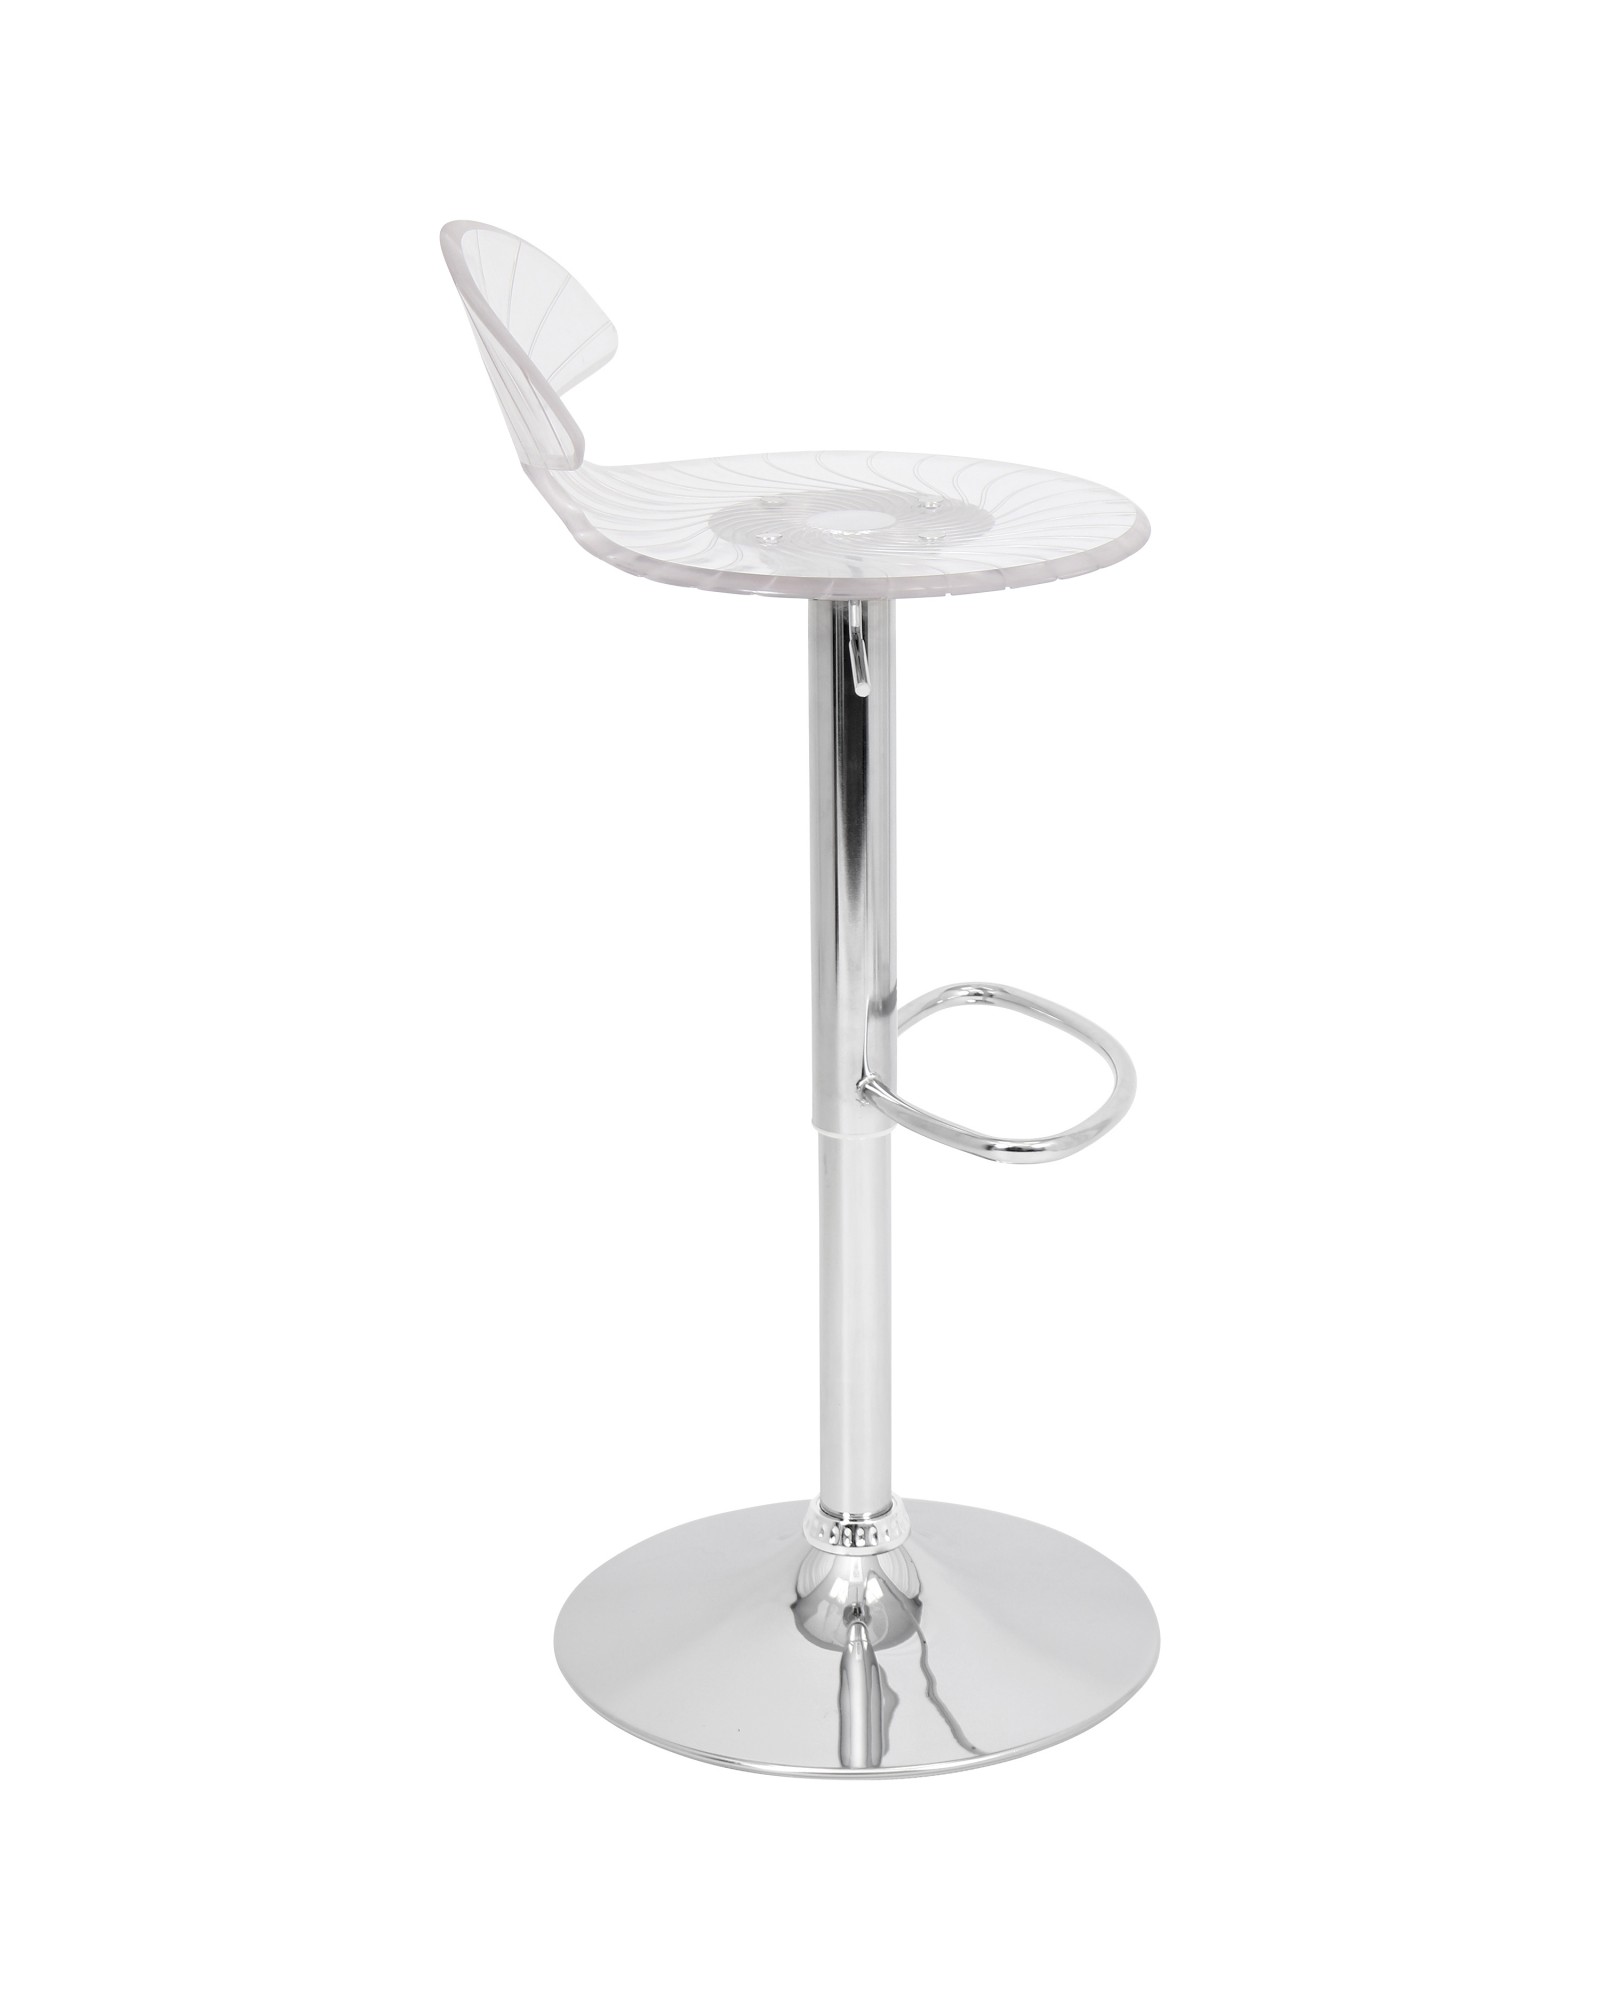 Spyra Contemporary Light Up and Height Adjustable Bar Stool in Multi